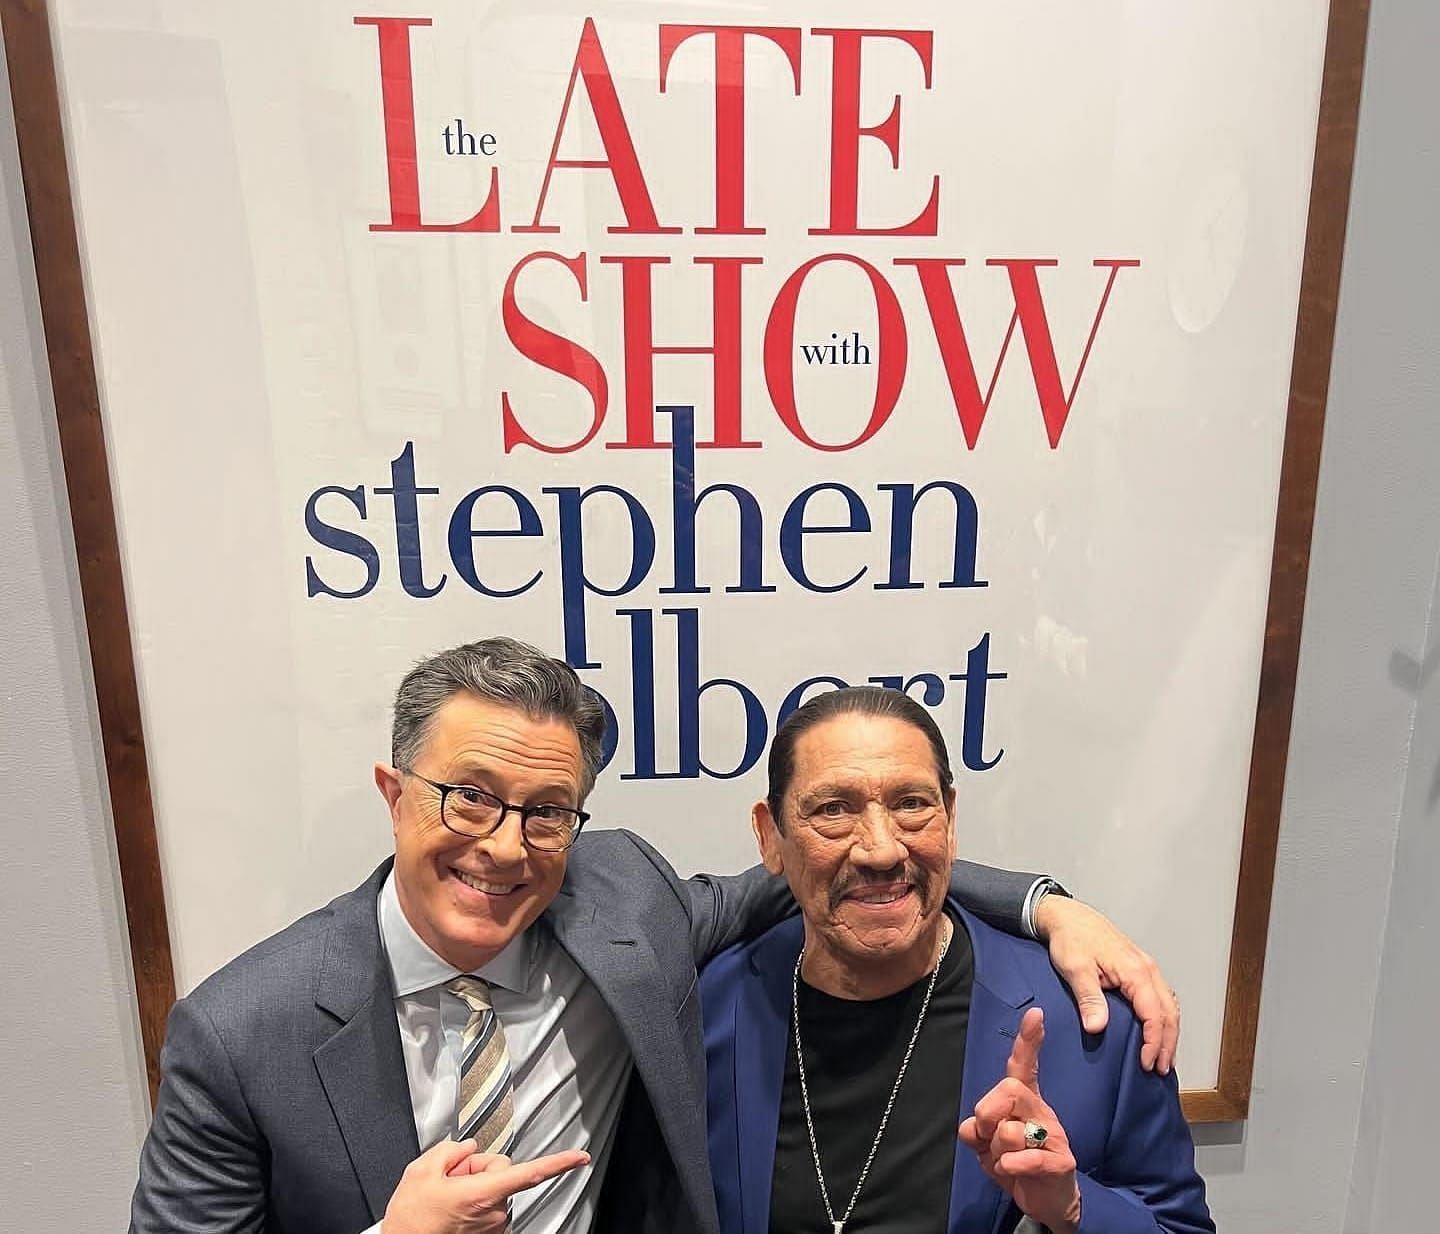 What is The Late Show with Stephen Colbert?